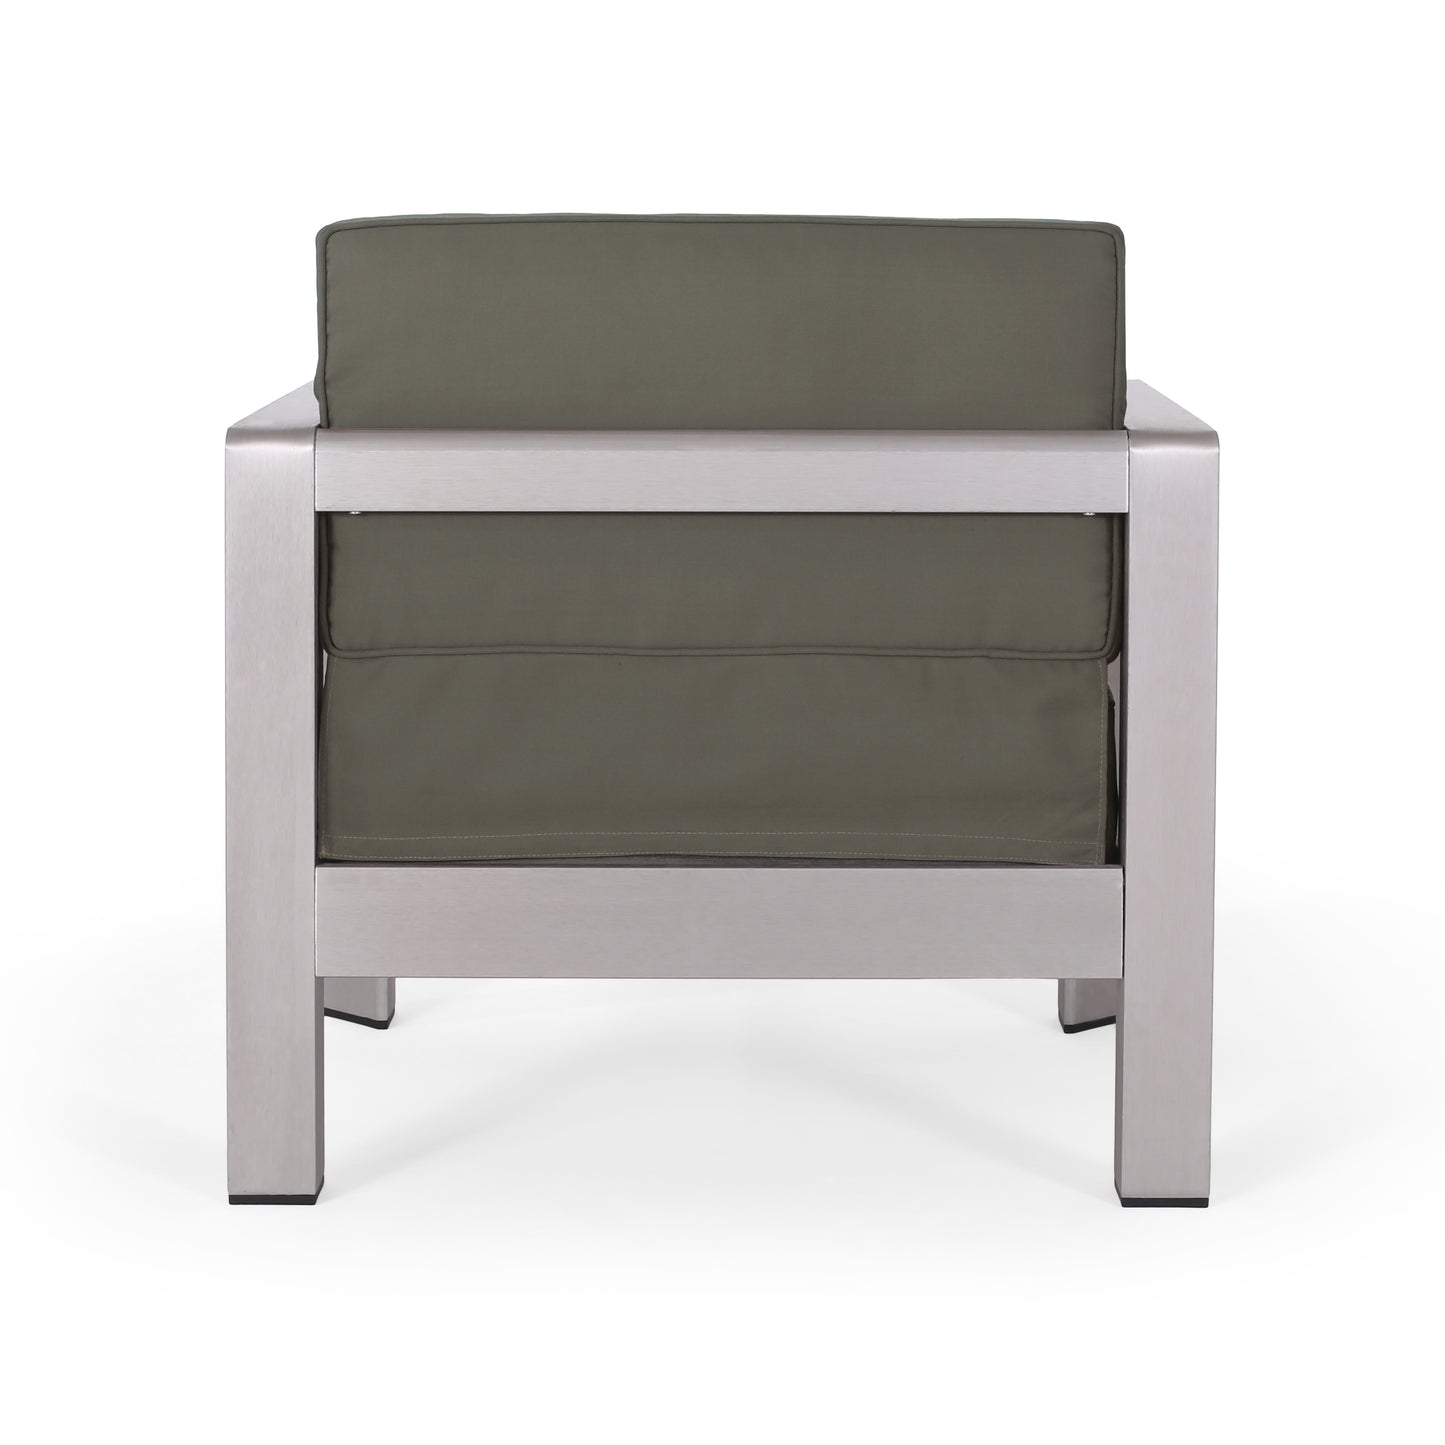 Emily 3-piece Outdoor Aluminum Club Chairs with Side Table